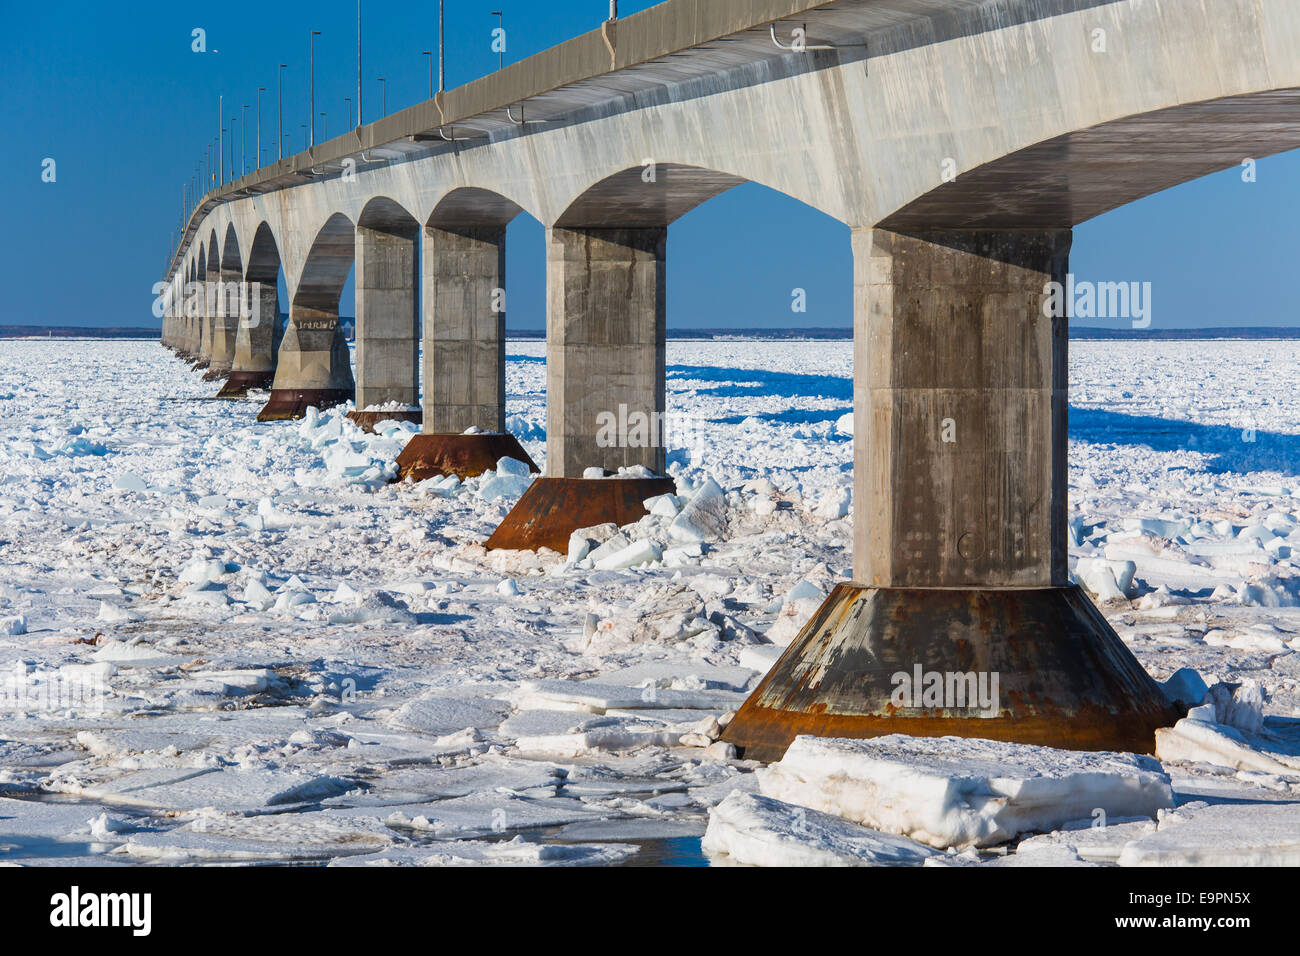 A winter view of the Confederation Bridge that links Prince Edward